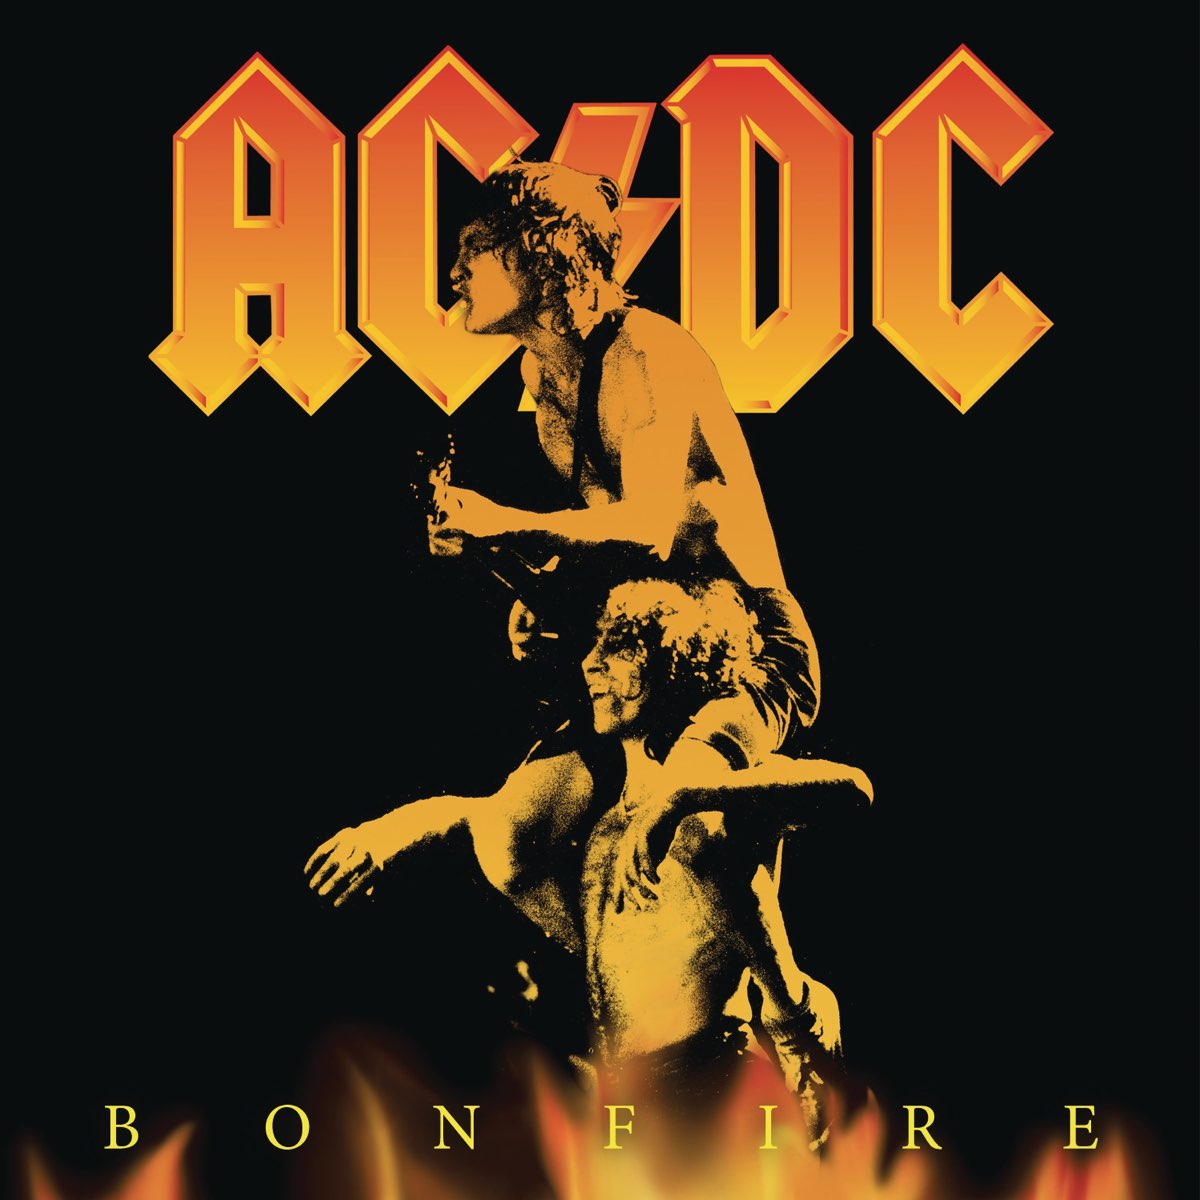 All 57 Bon Scott AC/DC songs ranked in order of greatness